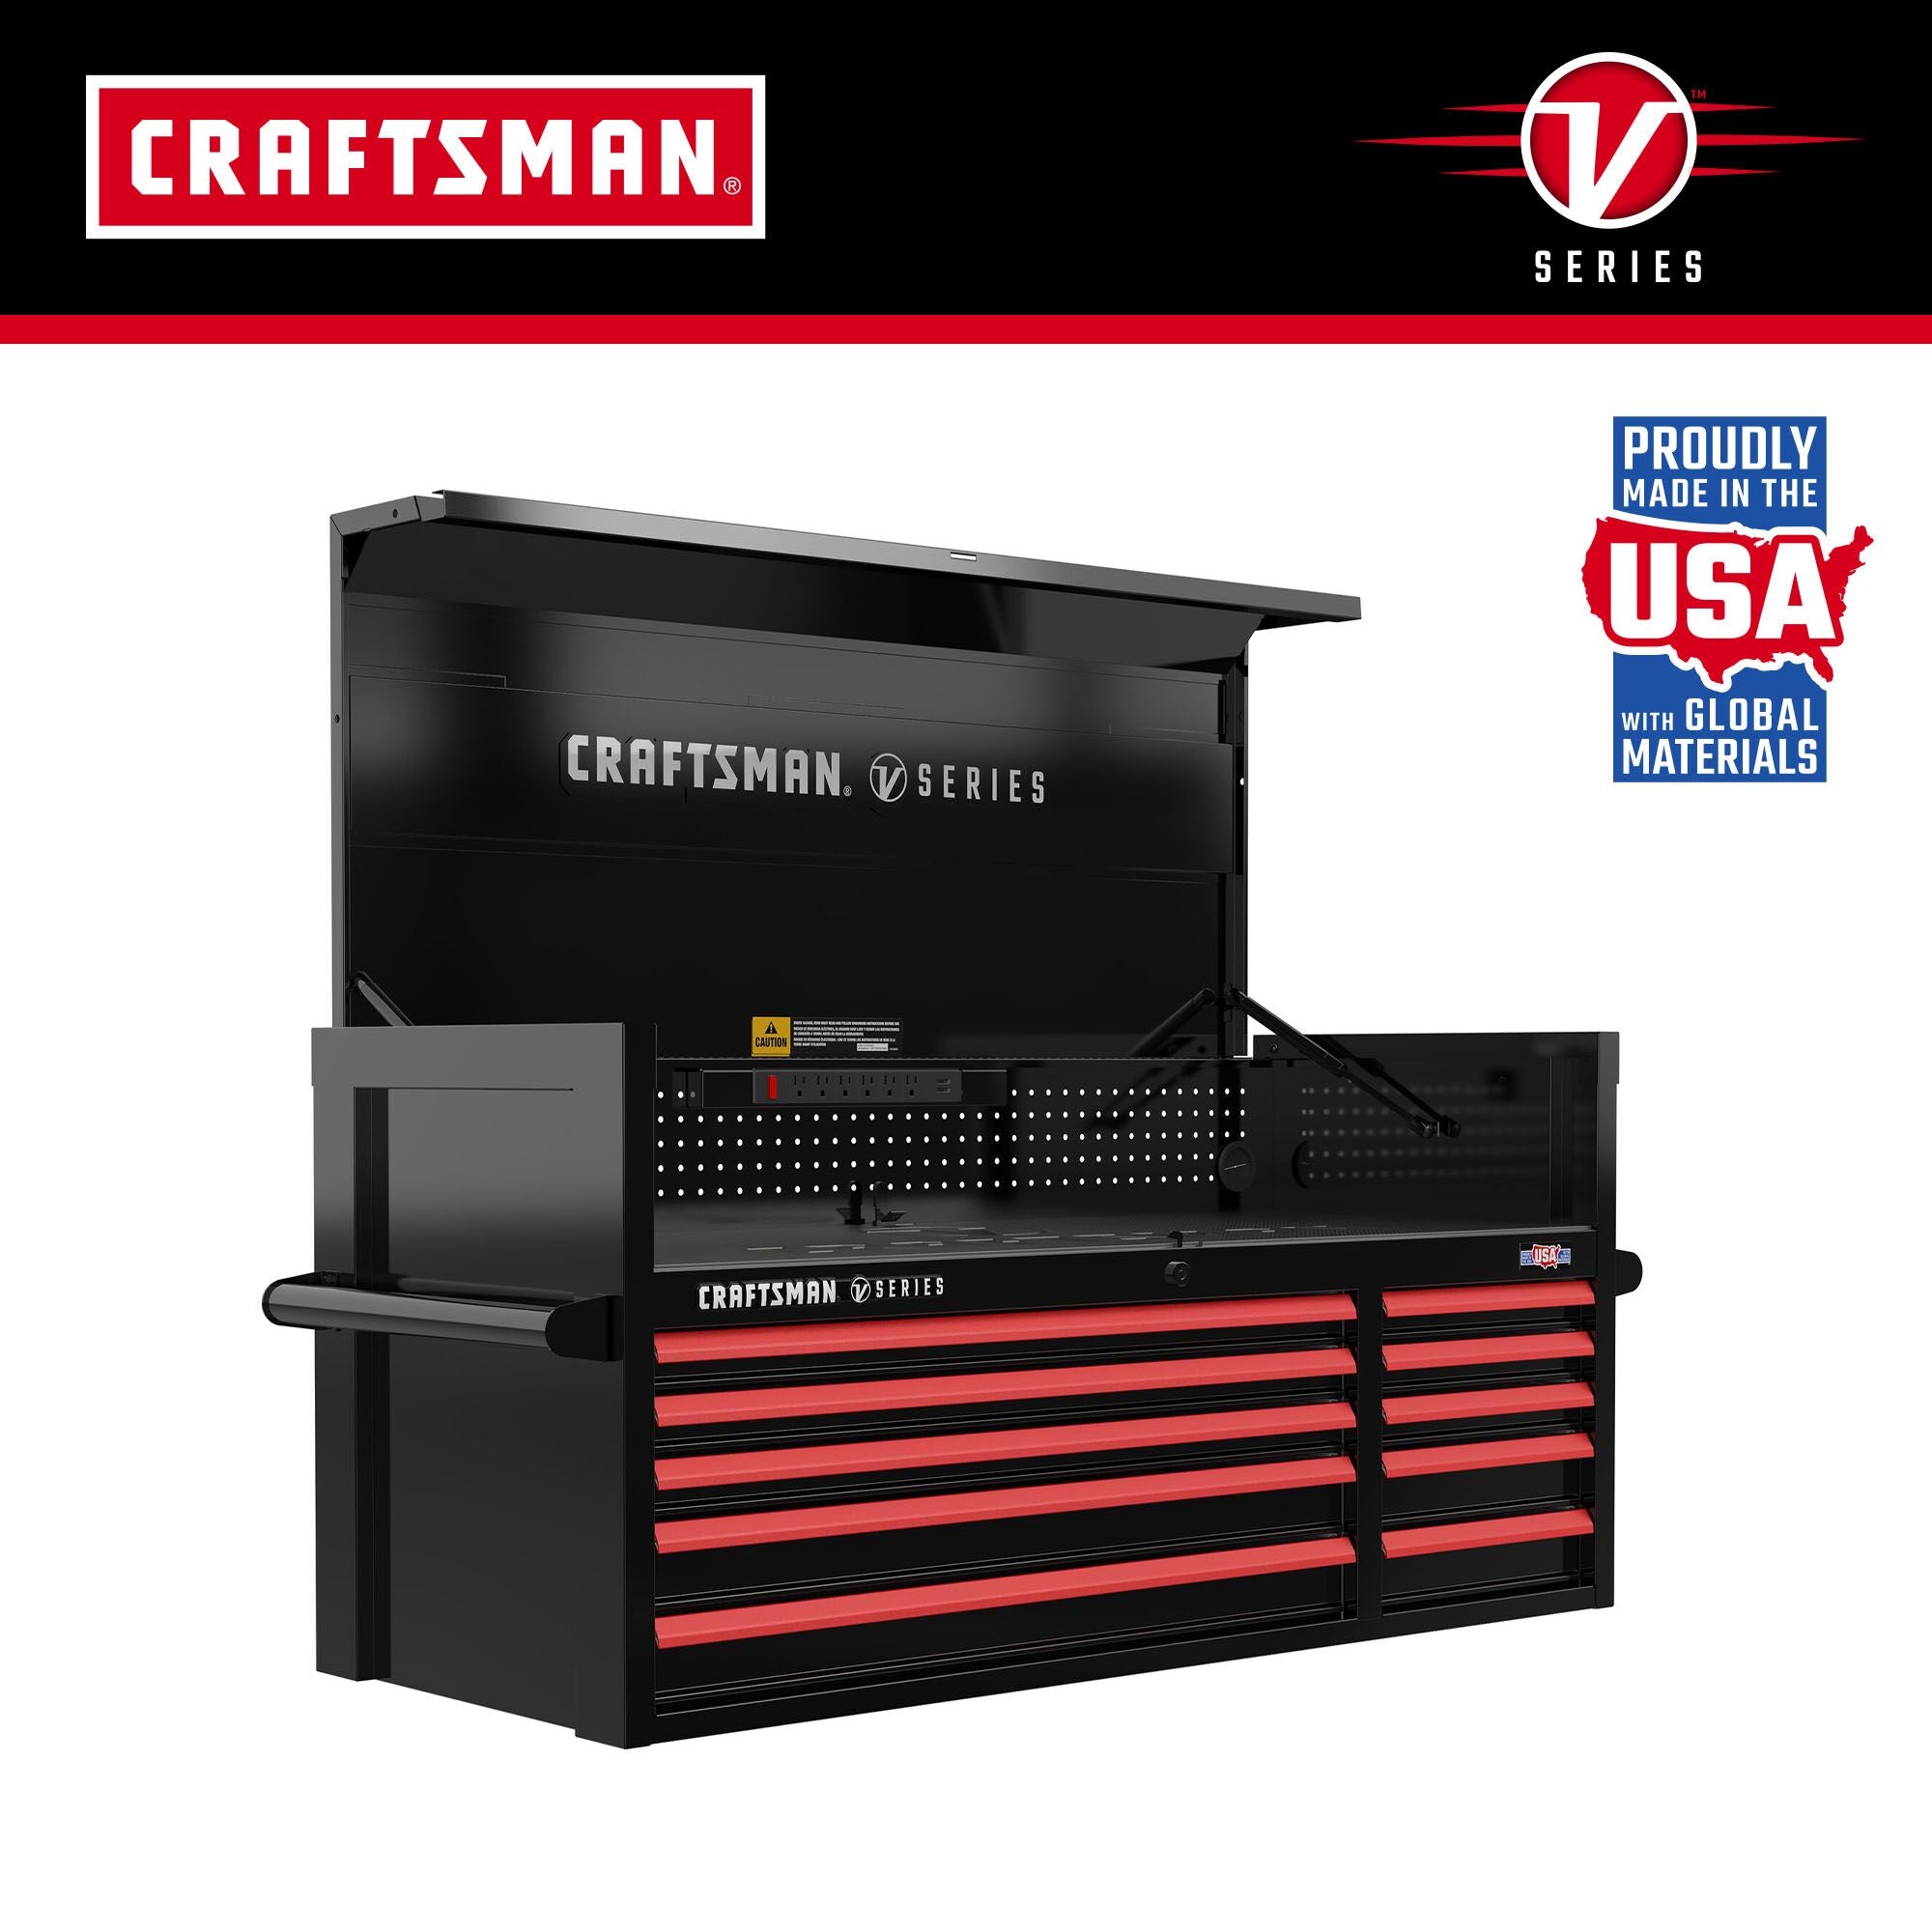 CRAFTSMAN V-Series 52-inch chest with V-Series and Made in the USA logos